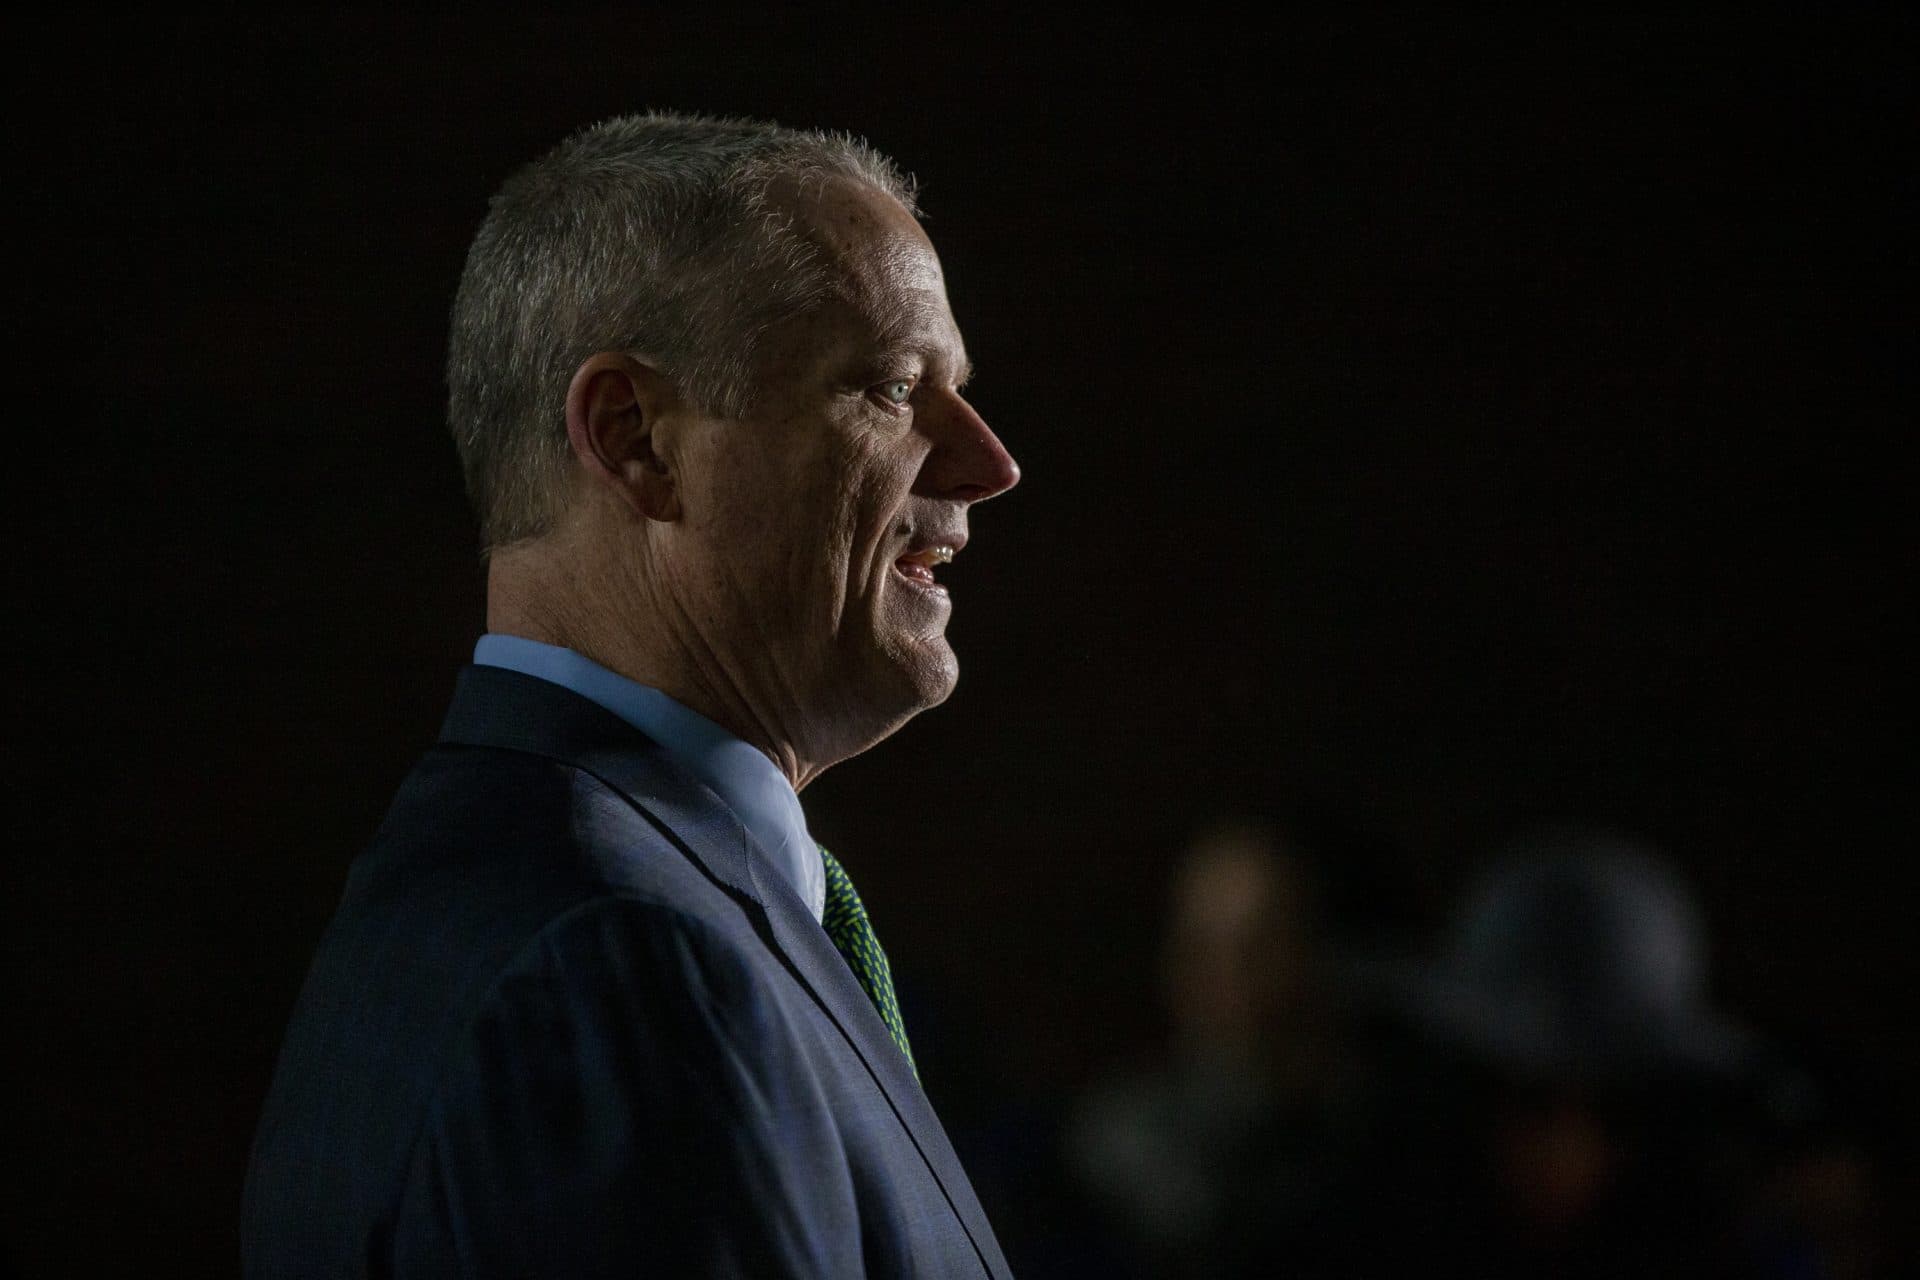 In this file photo from March 13, 2020, Gov. Baker speaks during Boston Mayor Marty Walsh's press conference to announce the postponement of the Boston Marathon. (Jesse Costa/WBUR)